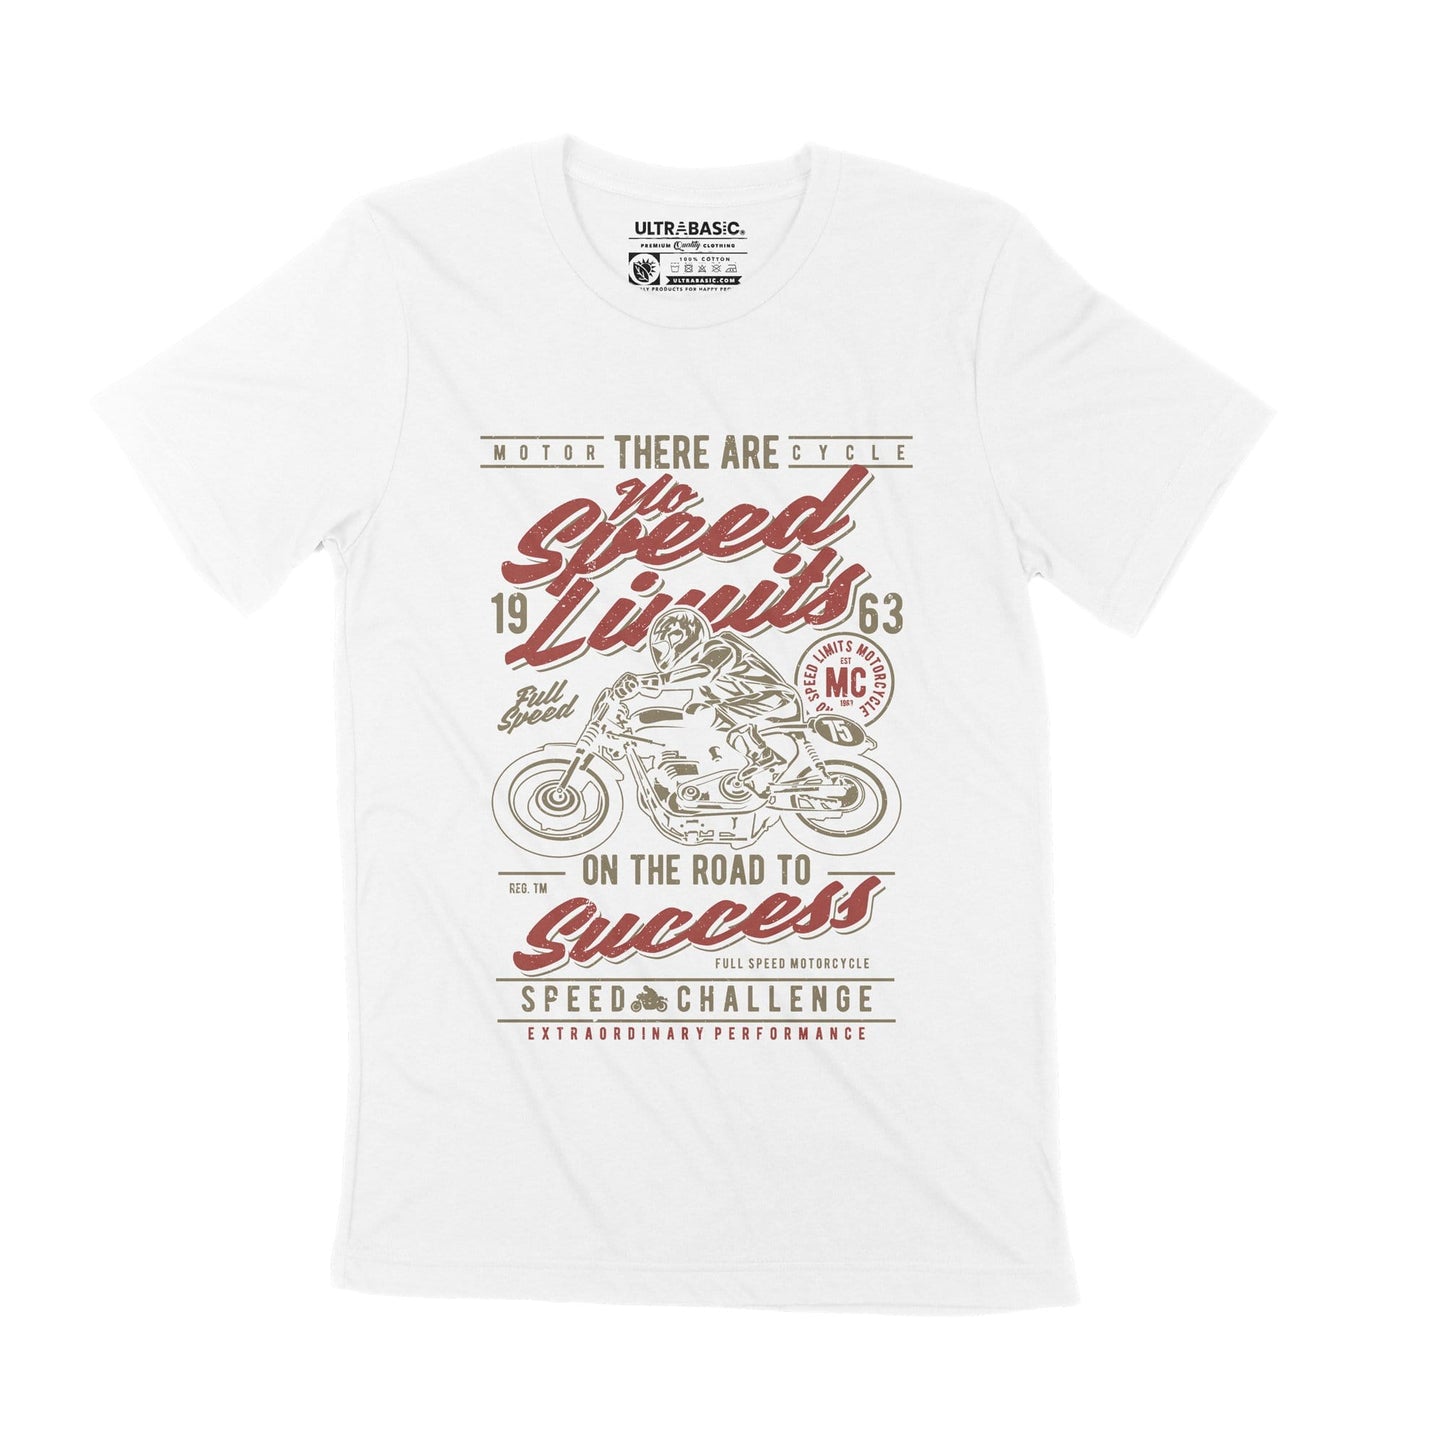 ULTRABASIC Vintage Motorcycle Shirt for Men - No Speed Limits Since 1963  clothing men outdoor oldtimer shirts mechanic victory hot rod outfits usa guy apparel road live simply tees unisex tshirts rock motor genuine live motorbike cafe racer indian motorcycles dad bikers patches fast driving casual merchandise garage